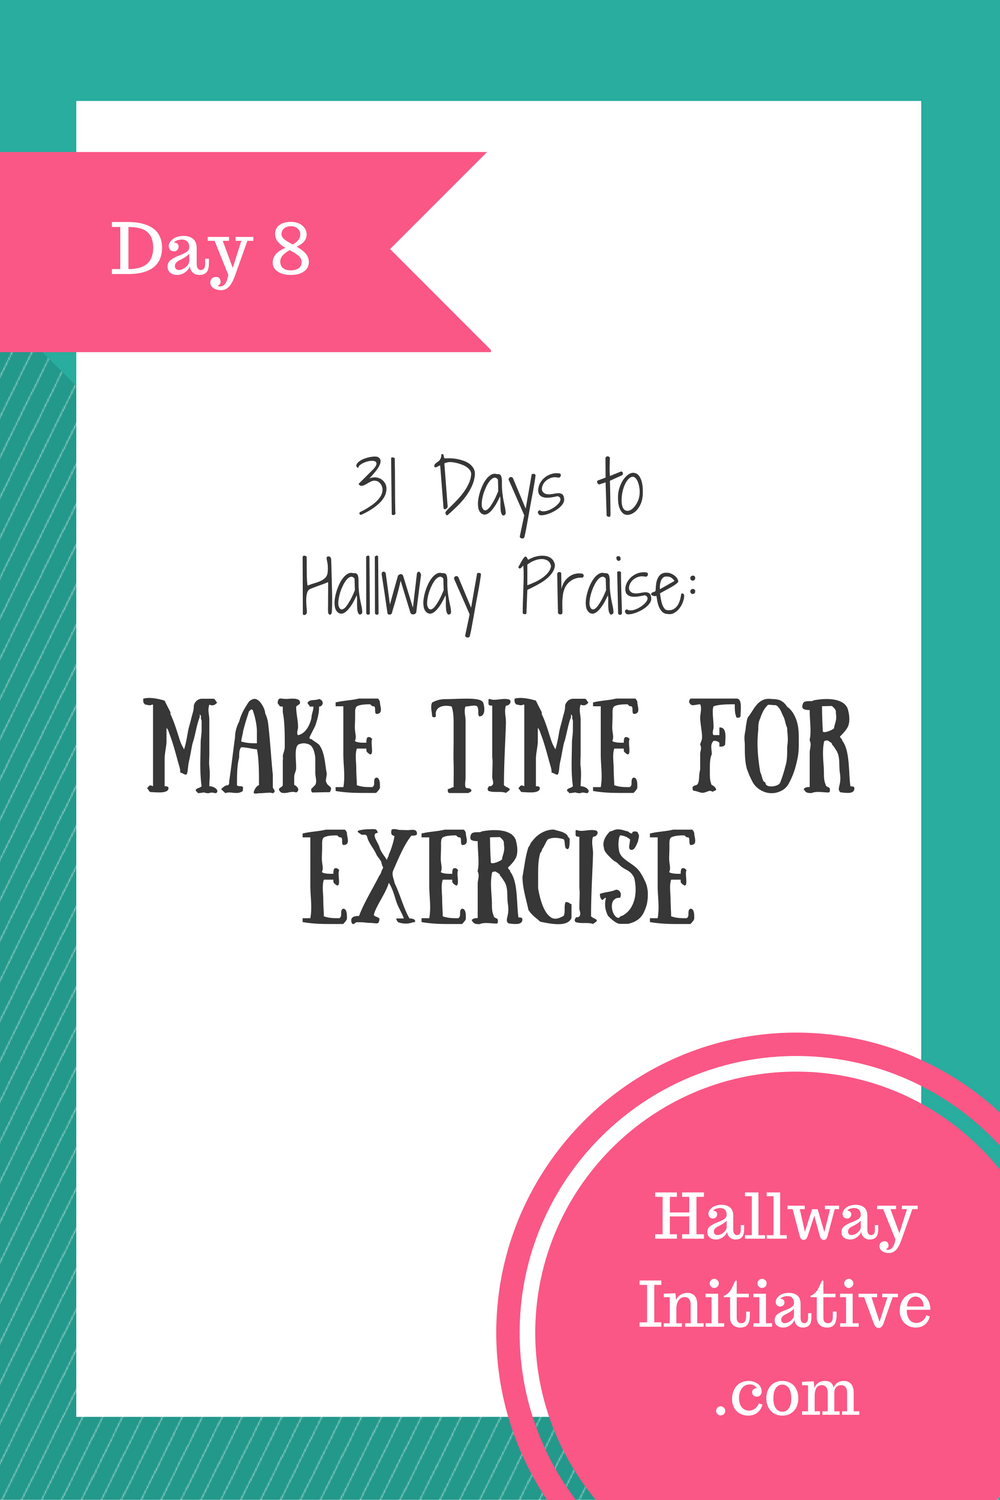 Day 8: make time for exercise